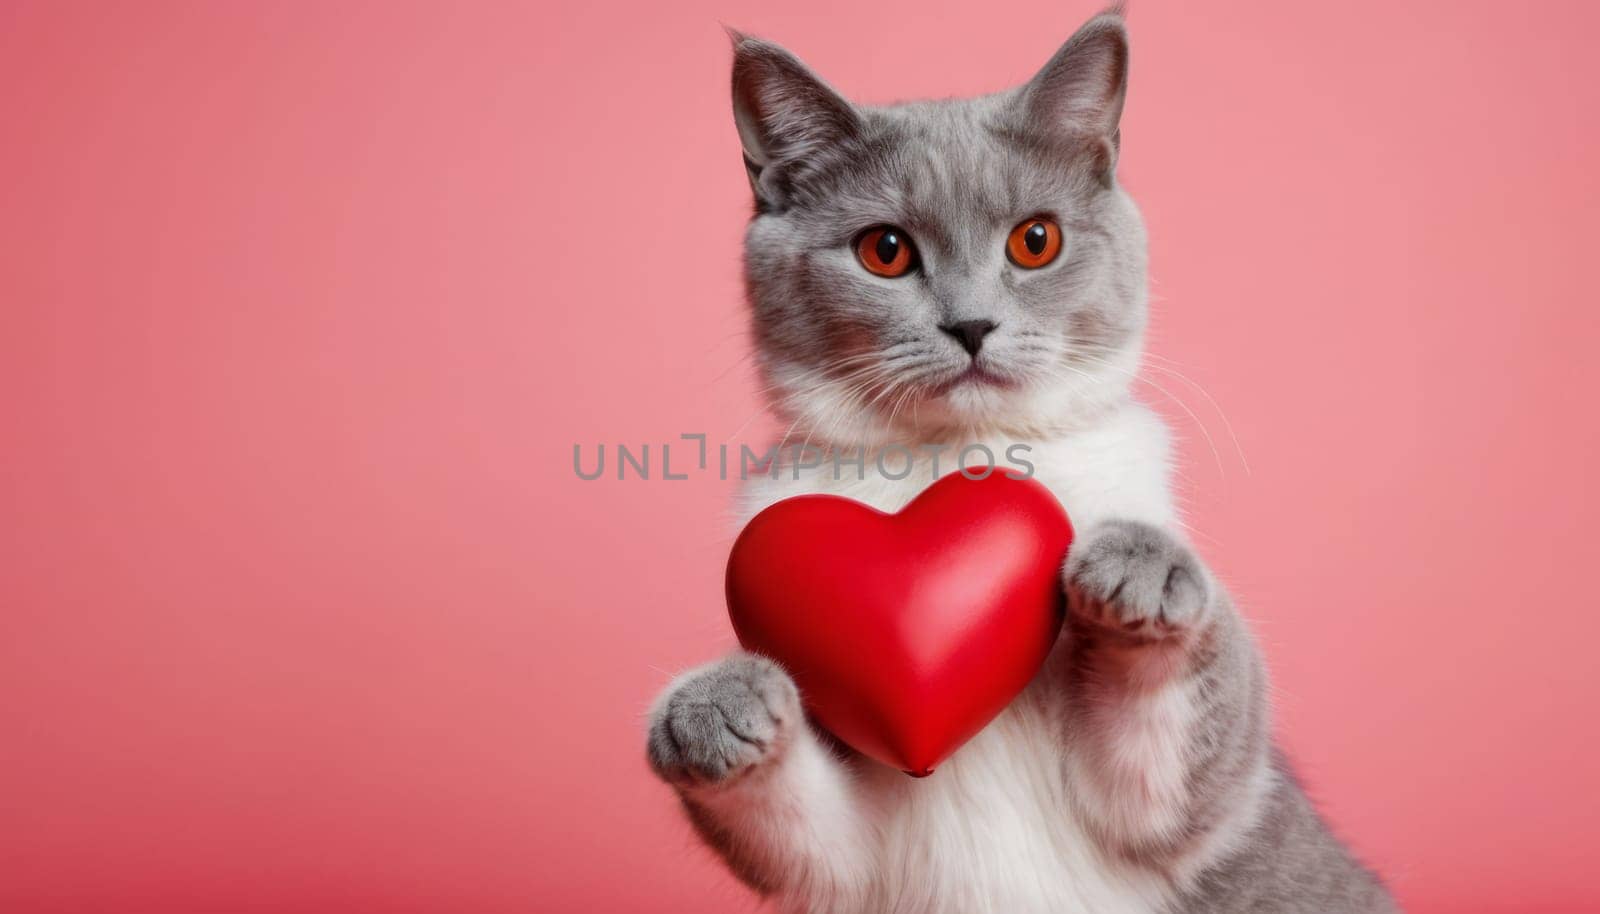 Grey Cat Holding Red Heart-shaped Object” by Andre1ns